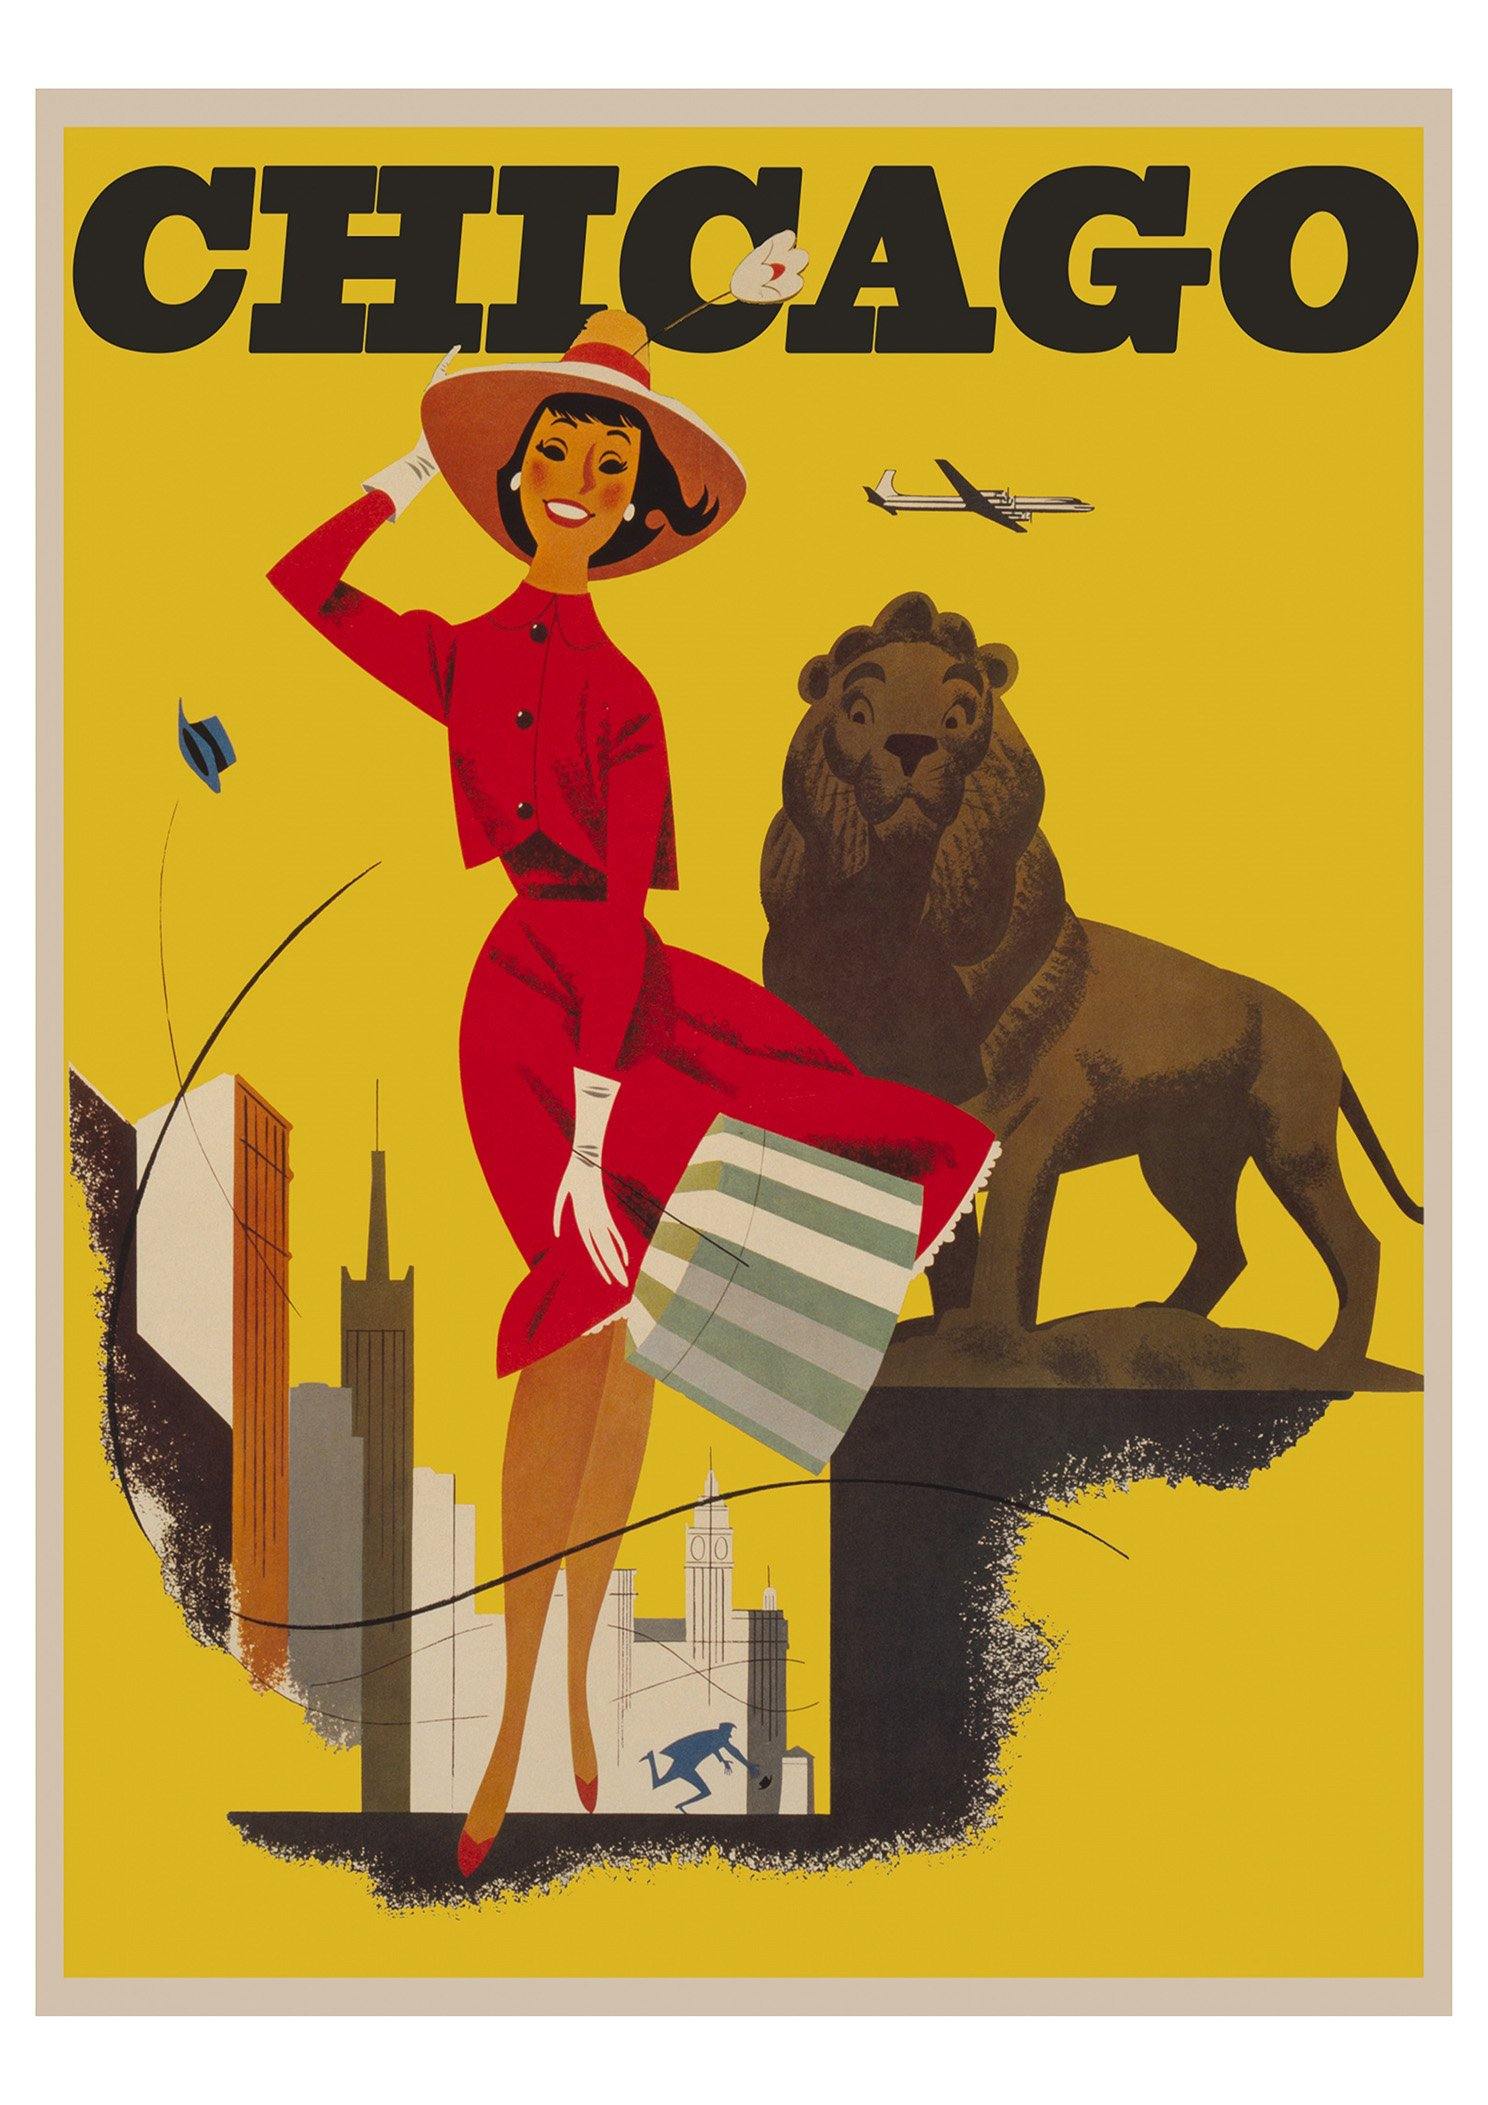 CHICAGO POSTER: Vintage Woman with Lion Yellow Travel Advert - Pimlico Prints